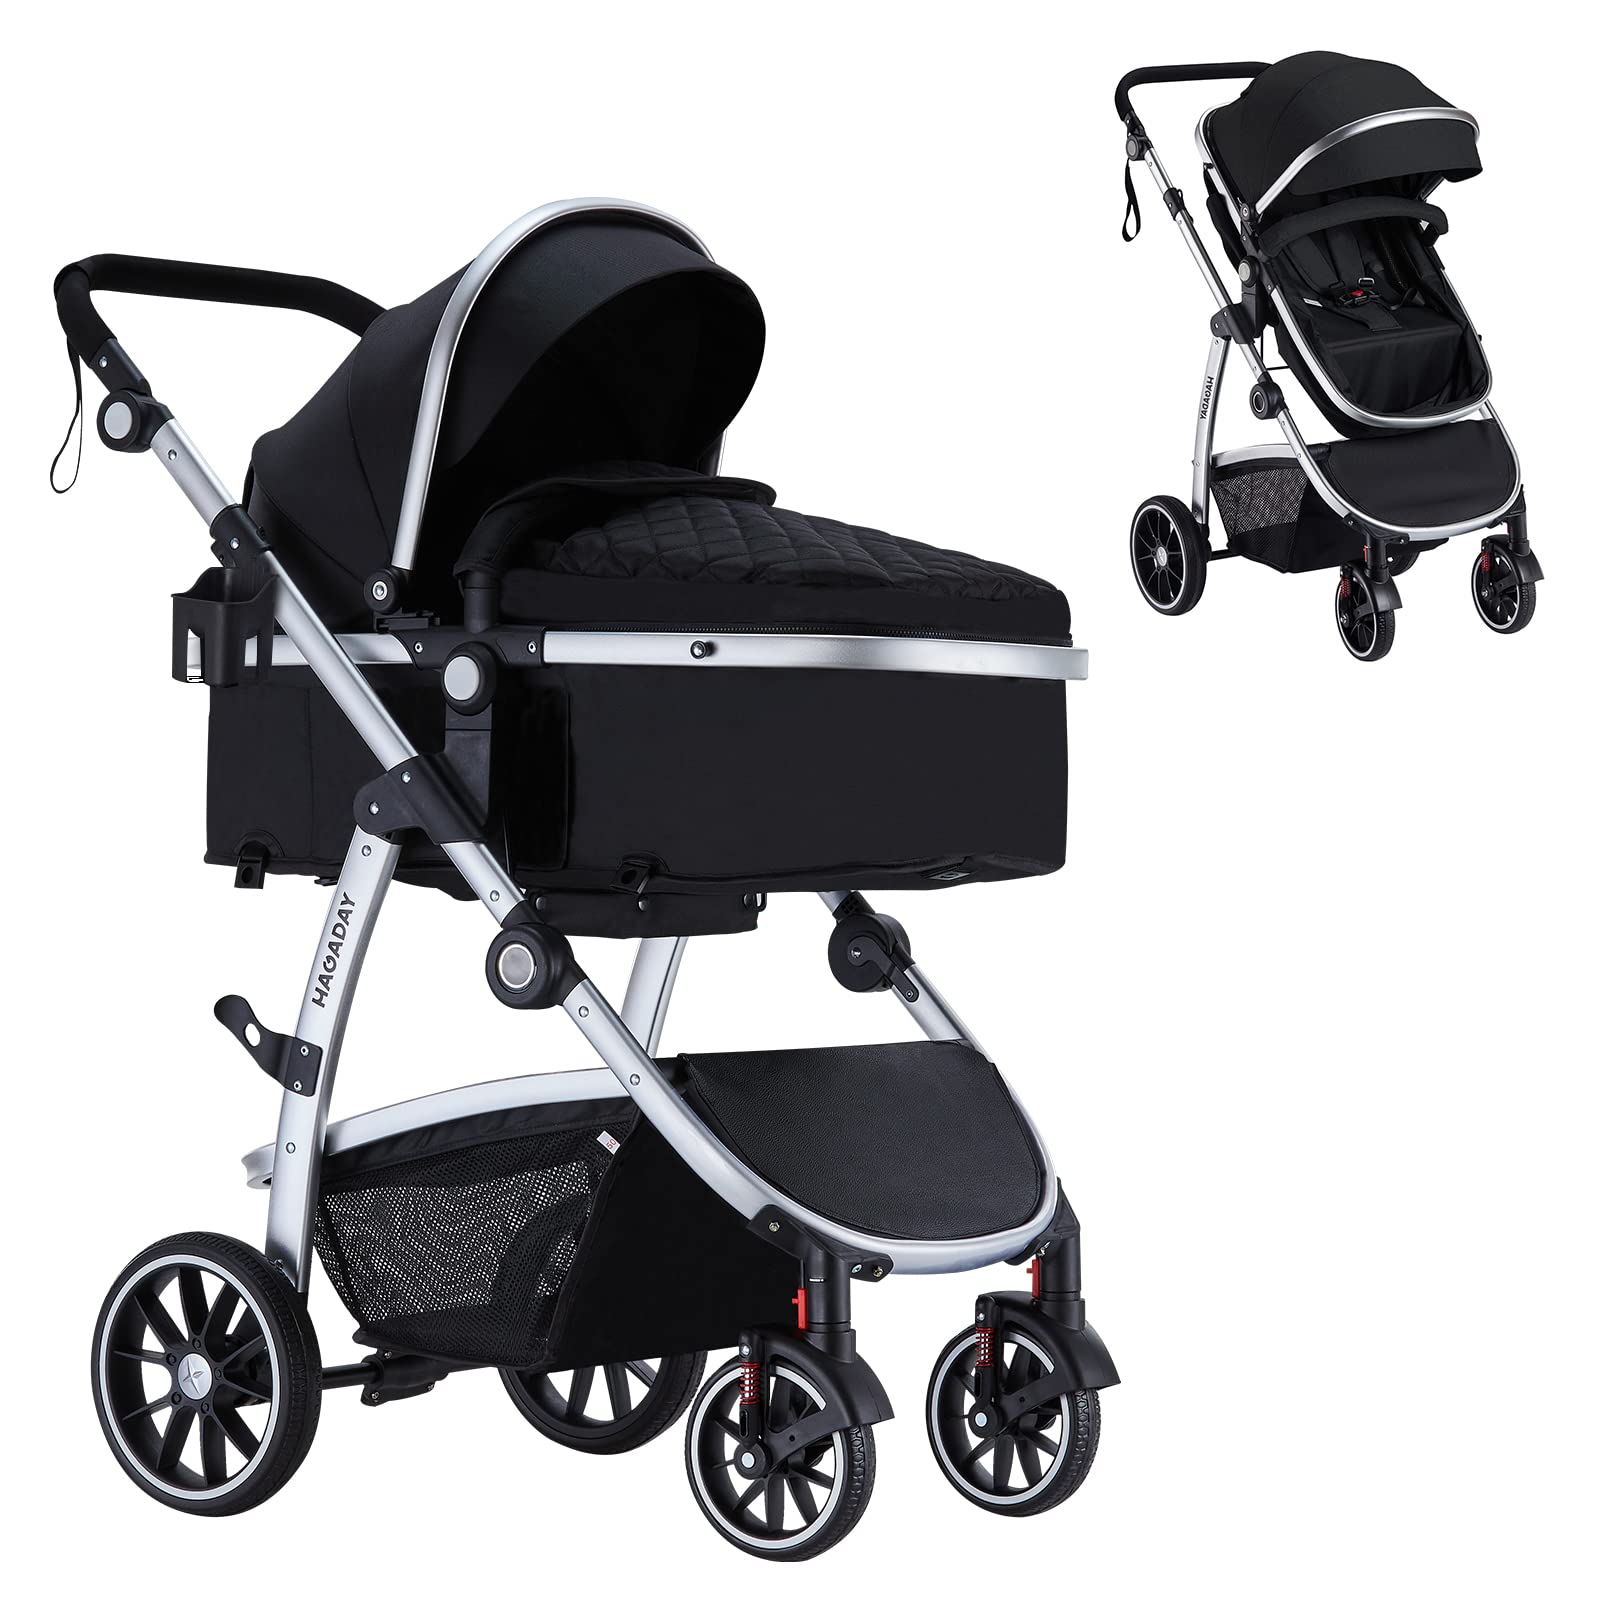 HAGADAY Baby Stroller, Infant Stroller with Reversible Seat, Newborn Stroller with Canopy,Baby Bassinet Stroller (Black)